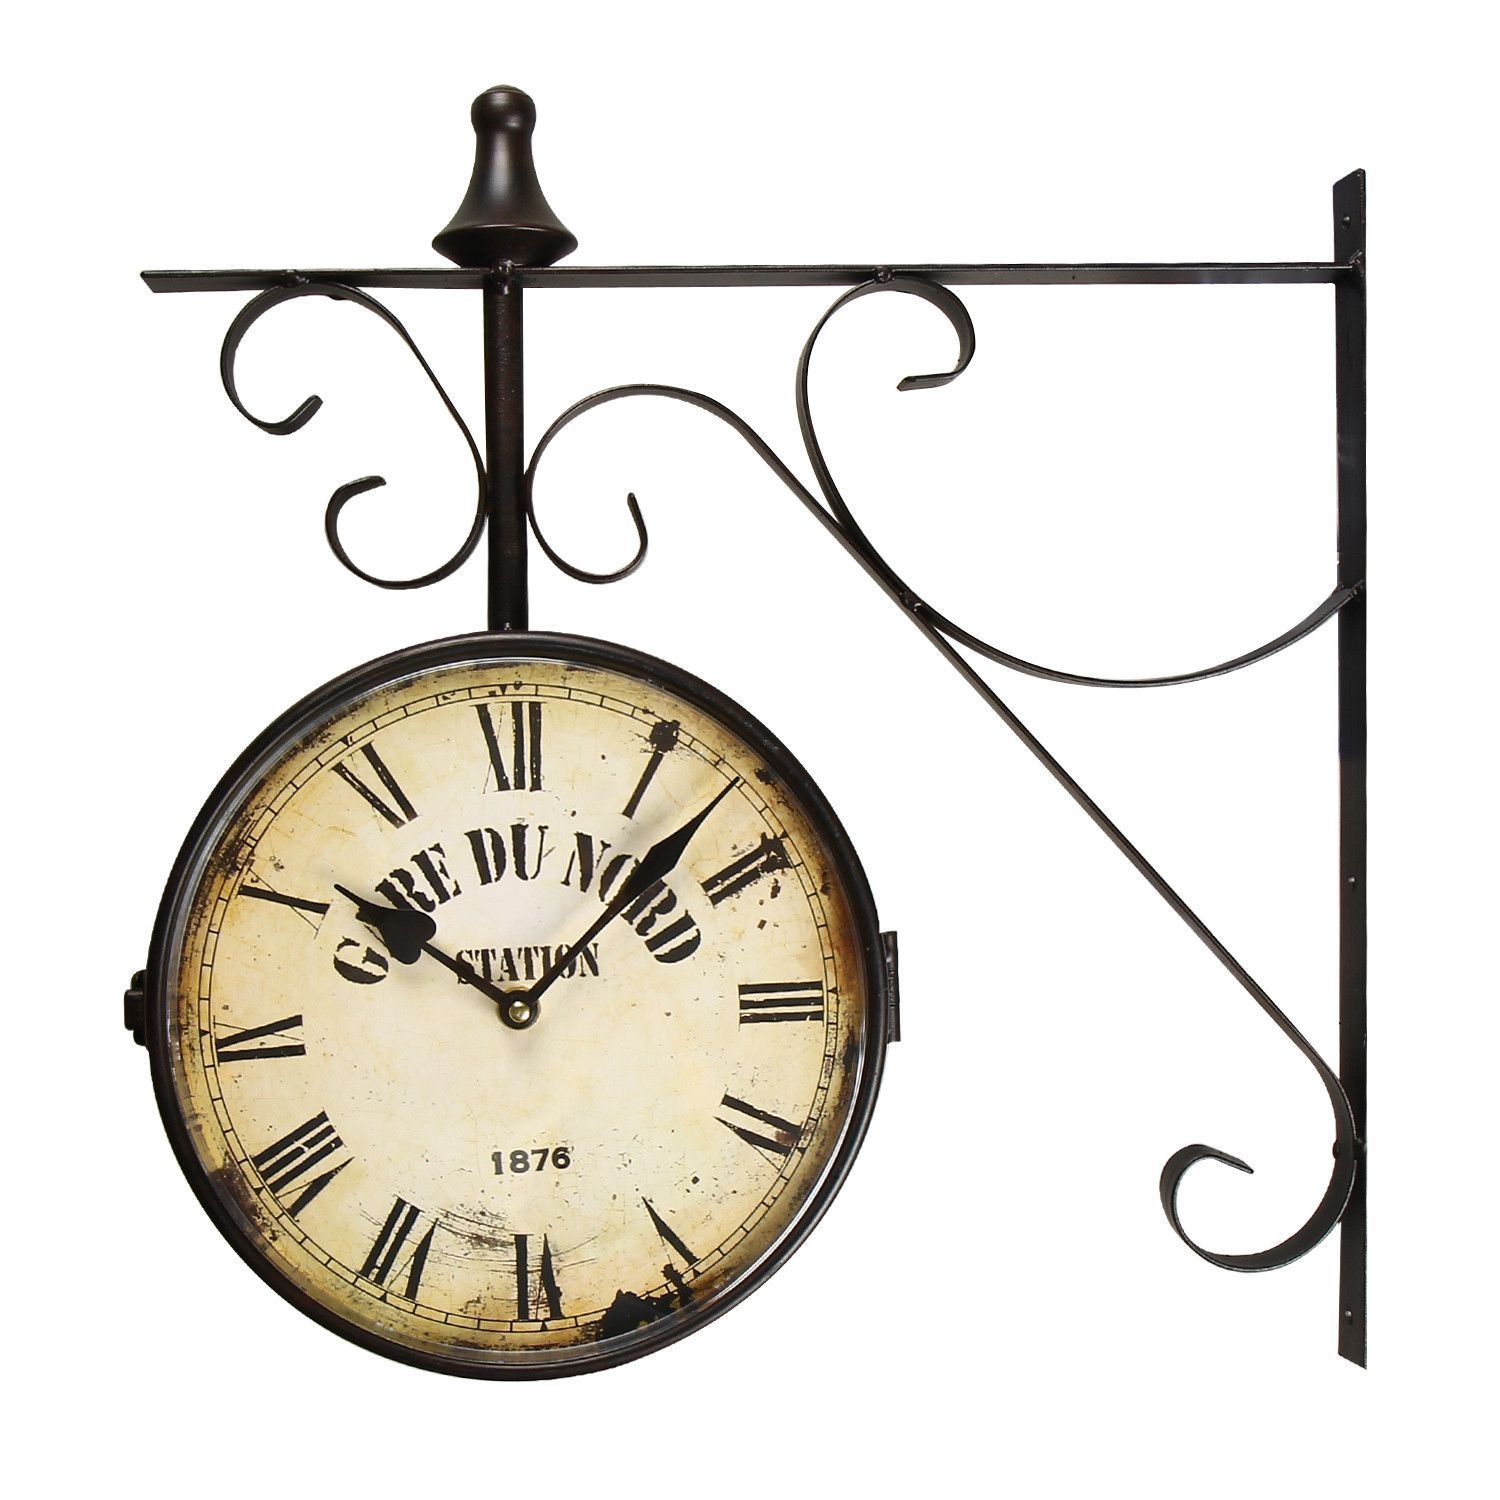 Adeco Black Iron Vintage-Inspired Round "Gard Du Nord Station" Double-Sided Wall Hanging Clock with Scroll Mount Home Decor